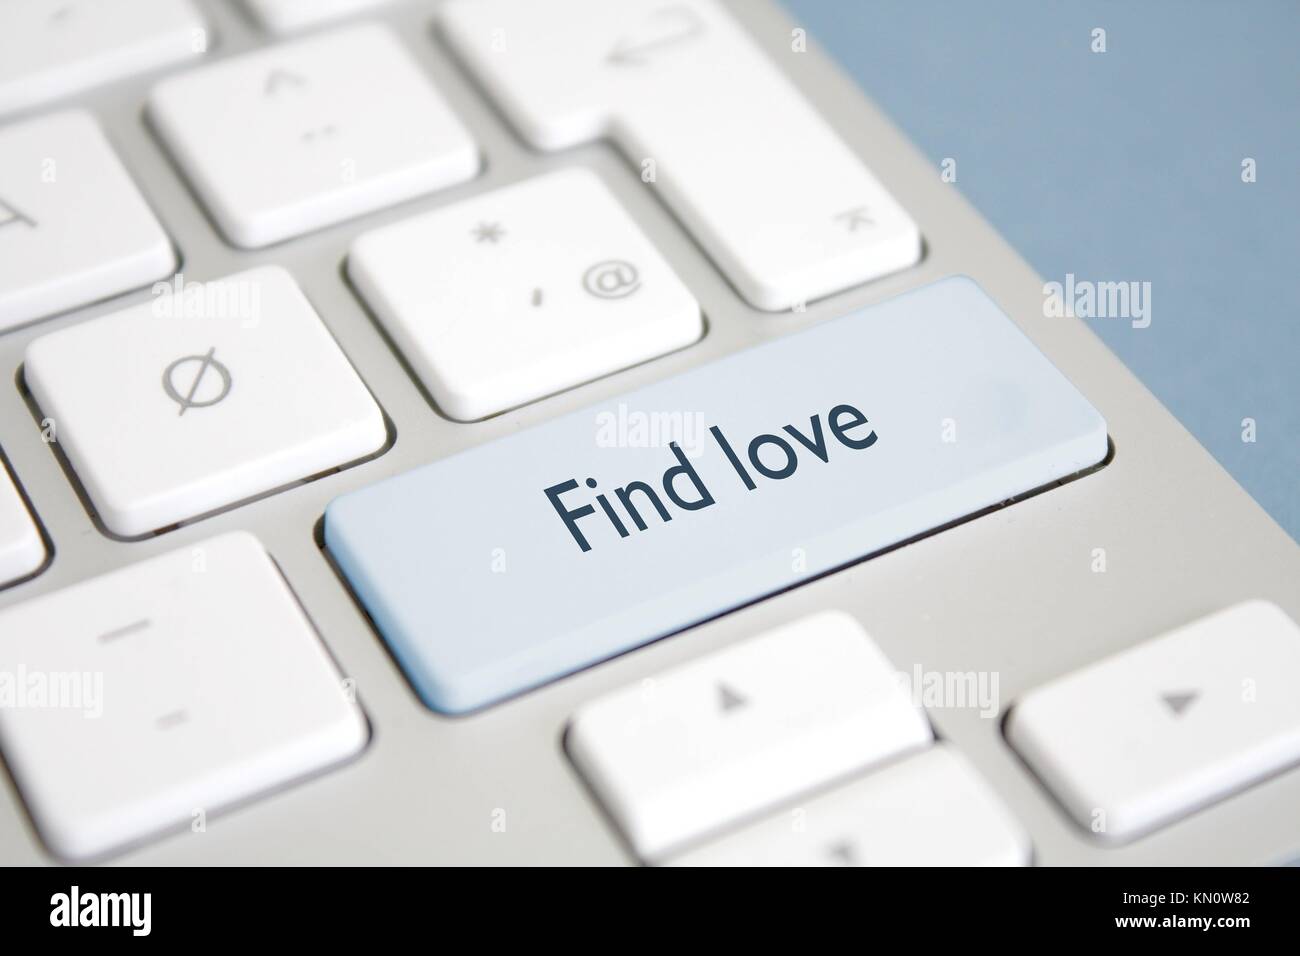 Find love Stock Photo